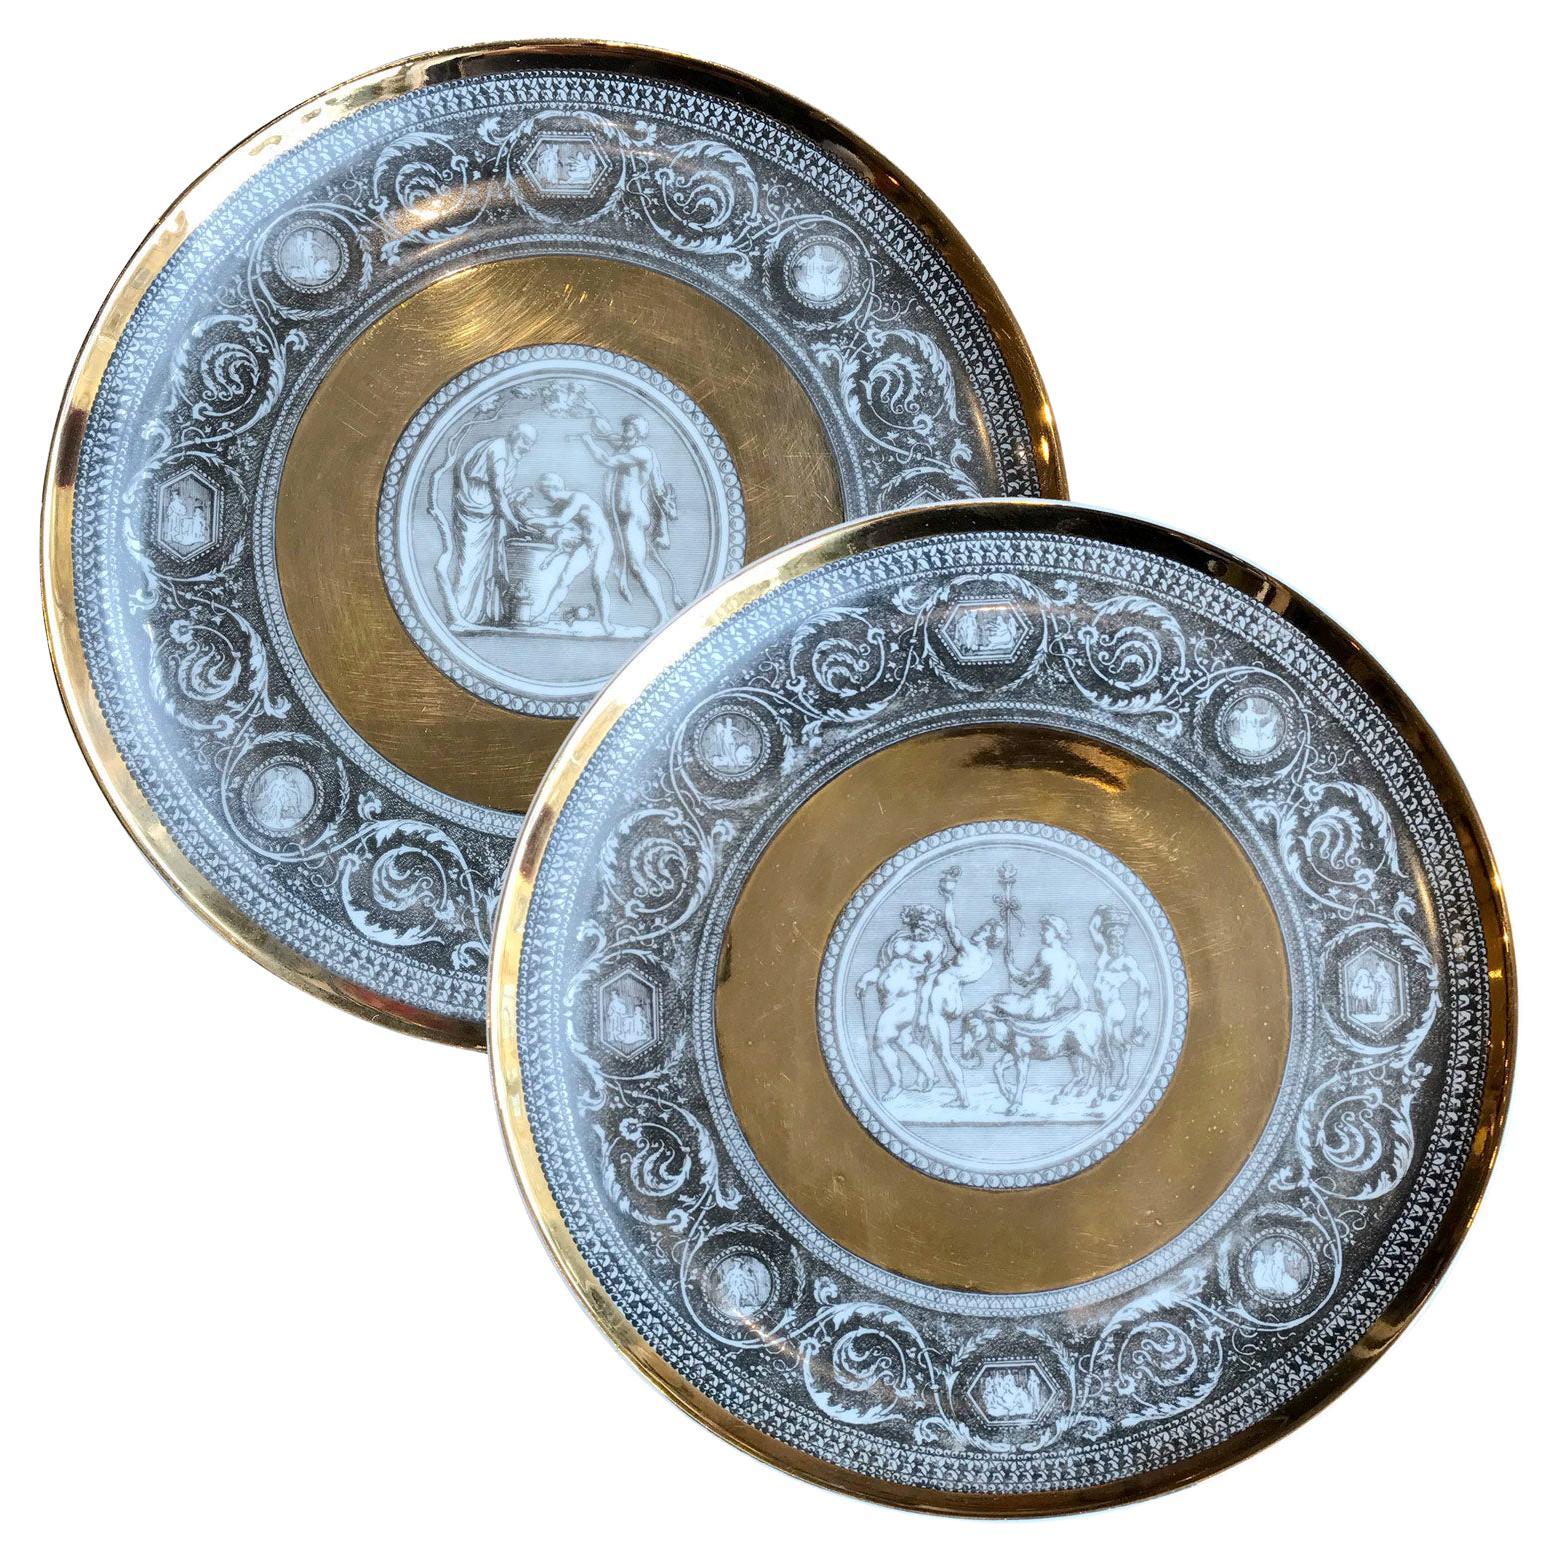 Pair of Dinner Plates Design "Cammei" by Piero Fornasetti Gold Plates